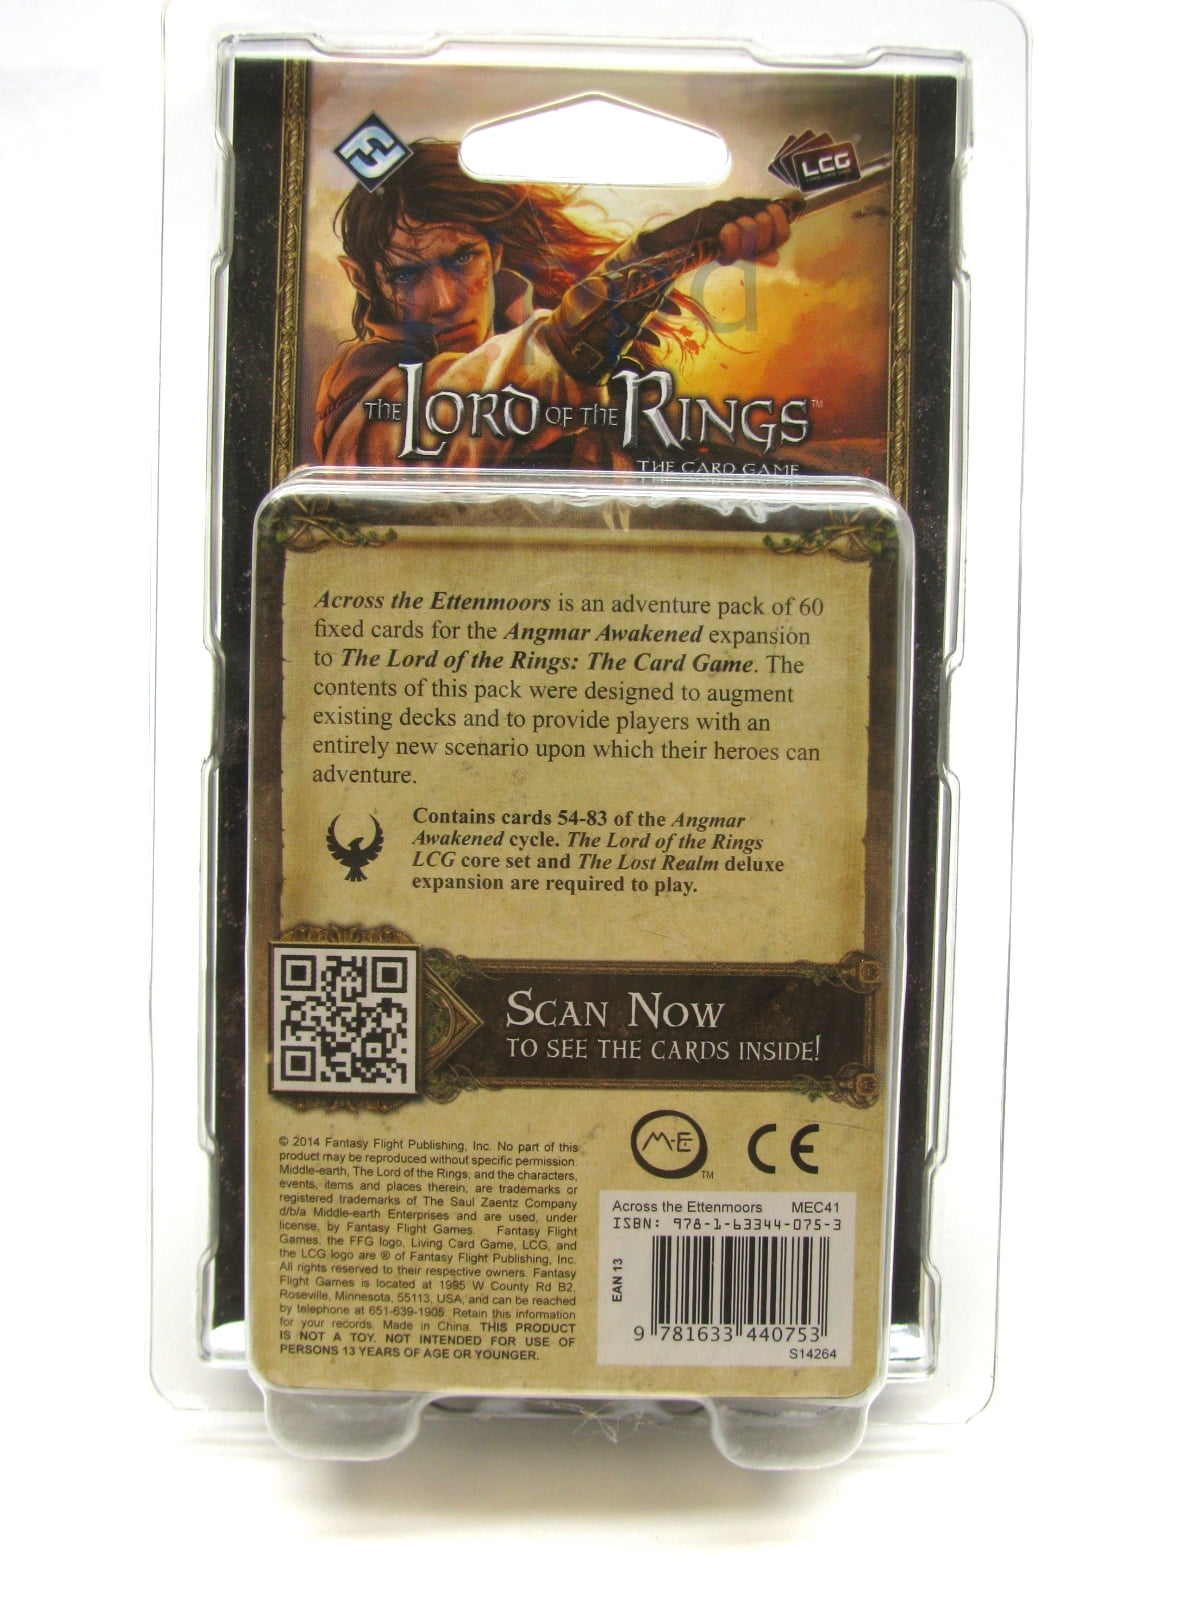 ACROSS THE ETTENMOORS Adventure Pack Lord of the Rings LCG Game *Sealed New*